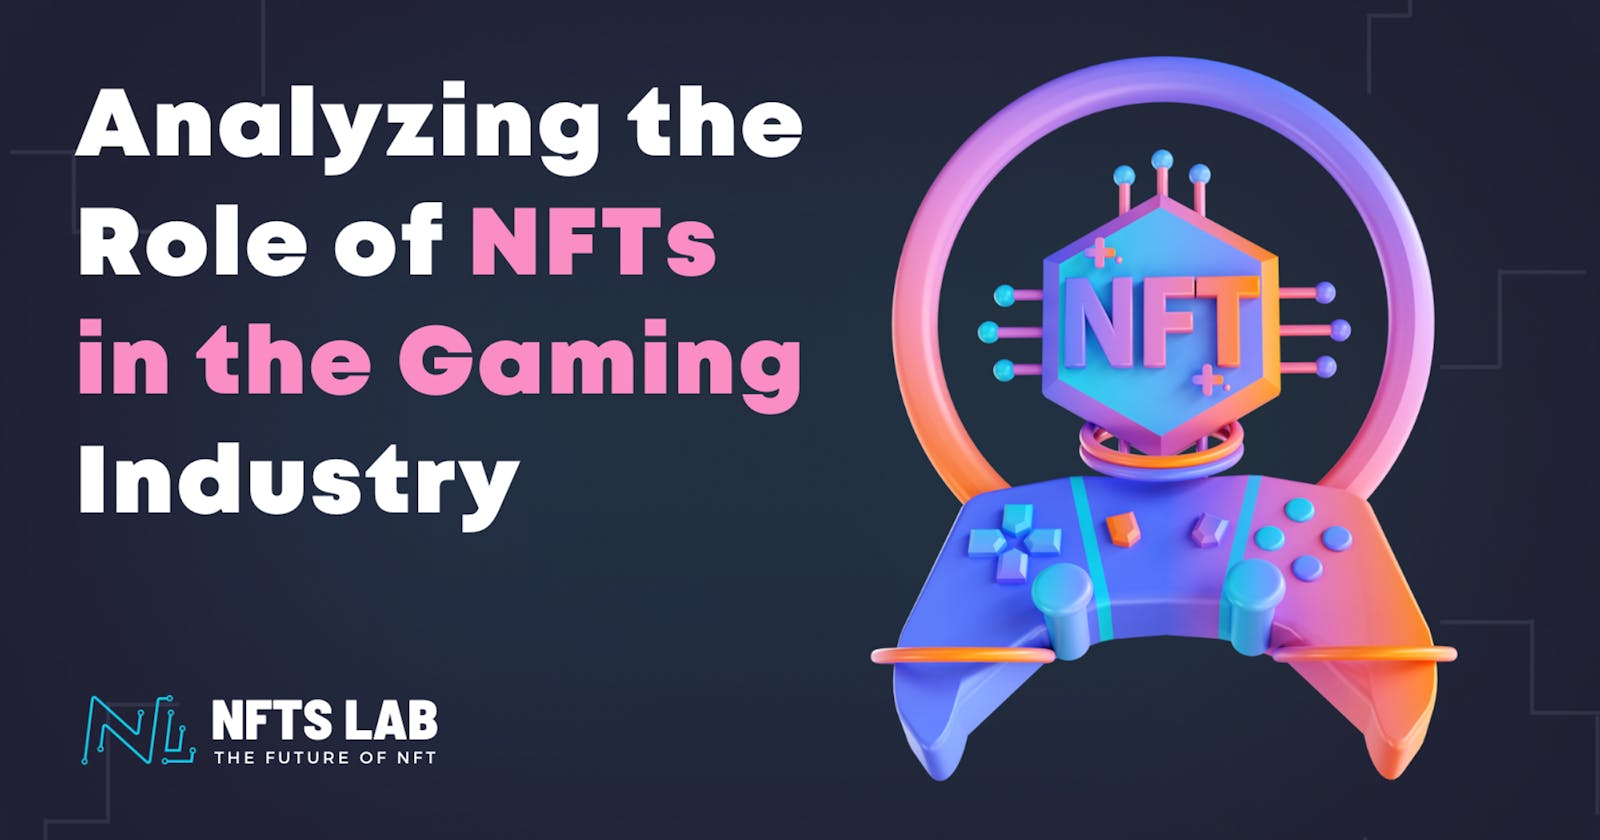 Analyzing the Role of NFTs in the Gaming Industry